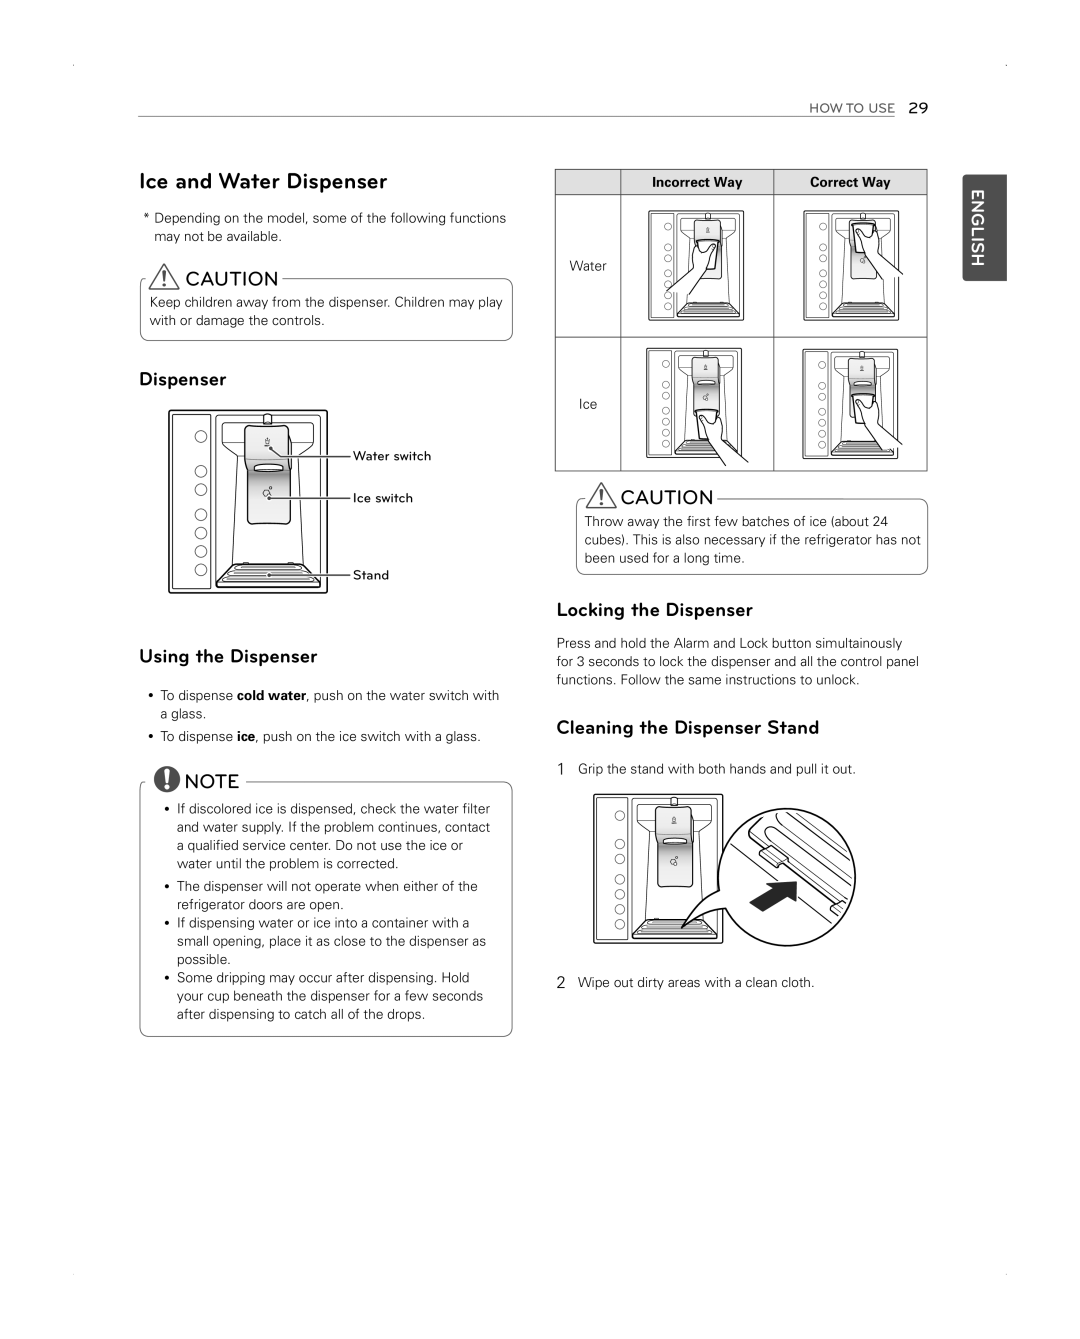 LG Electronics LFX31945ST Ice and Water Dispenser, Using the Dispenser, Locking the Dispenser, English, How To Use 